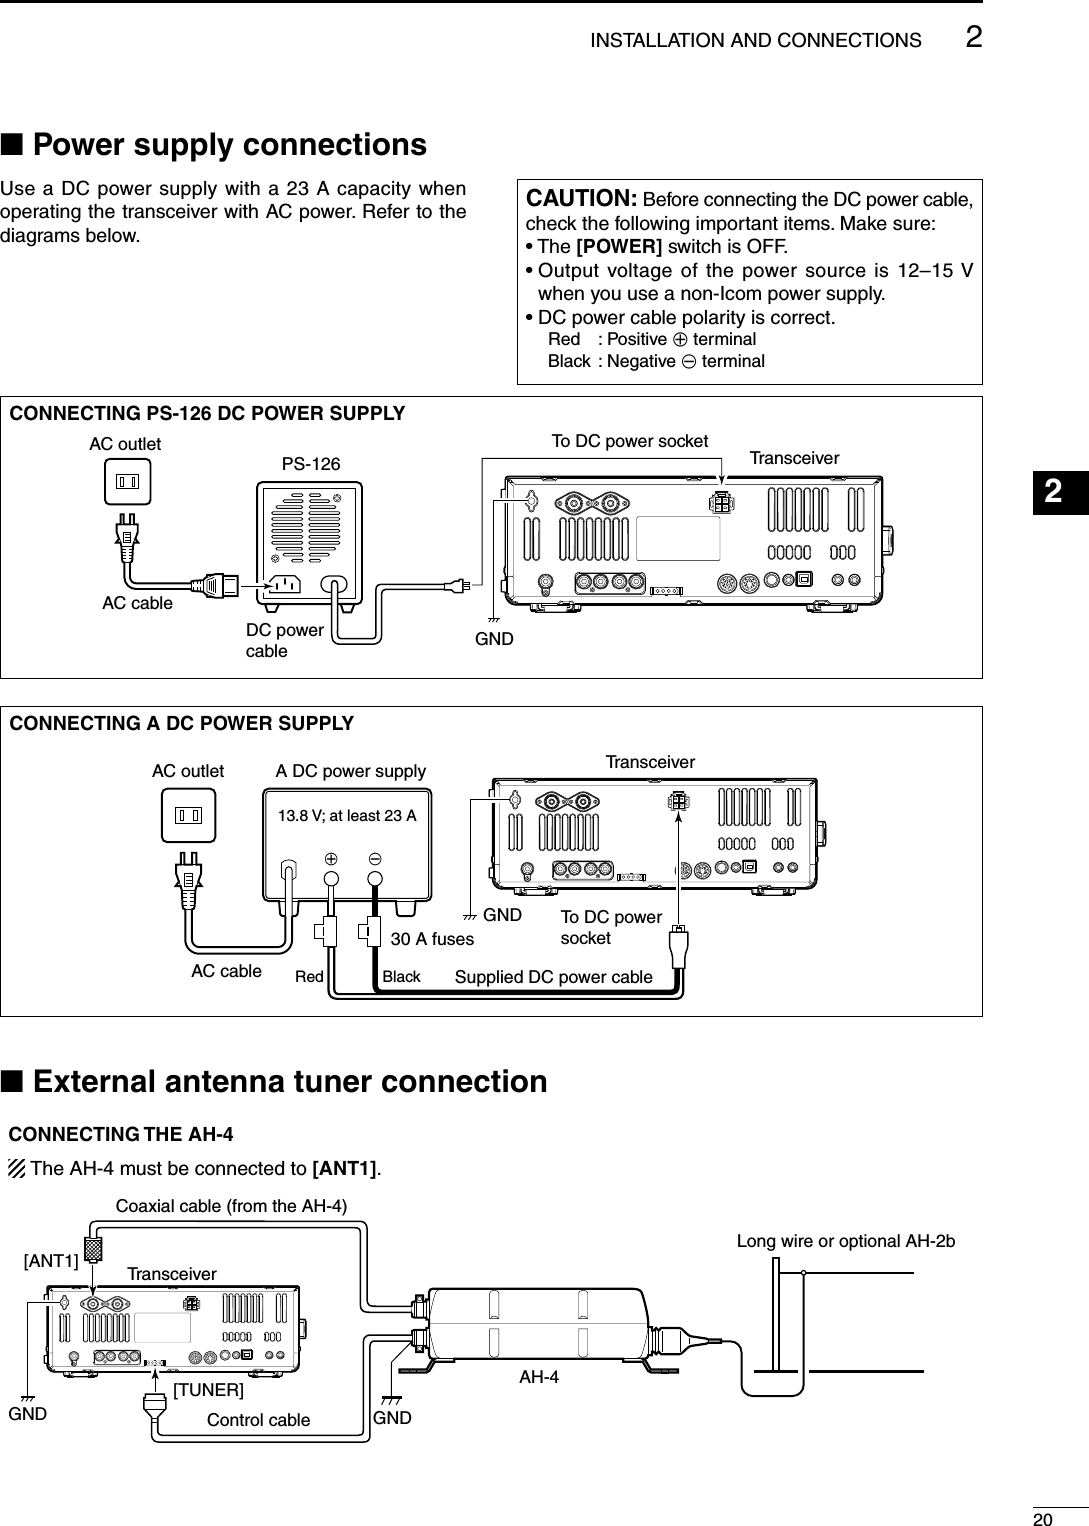 N Power supply connectionsUse a DC power supply with a 23 A capacity when operating the transceiver with AC power. Refer to the diagrams below.CAUTION: Before connecting the DC power cable, check the following important items. Make sure:• The [POWER] switch is OFF.•  Output voltage of the power source is 12–15 V when you use a non-Icom power supply.• DC power cable polarity is correct. Red : Positive + terminal Black : Negative _ terminalCONNECTING A DC POWER SUPPLYA DC power supplyAC outletAC cable30 A fusesSupplied DC power cable13.8 V; at least 23 A_+TransceiverTo DC powersocketGNDBlackRedN External antenna tuner connectionCONNECTING THE AH-4The AH-4 must be connected to [ANT1].Coaxial cable (from the AH-4)[ANT1]Control cableTransceiverGNDAH-4Long wire or optional AH-2b[TUNER]GNDCONNECTING PS-126 DC POWER SUPPLYPS-126DC powercableTo DC power socket TransceiverAC outletAC cableGND202INSTALLATION AND CONNECTIONS123456789101112131415161718192021